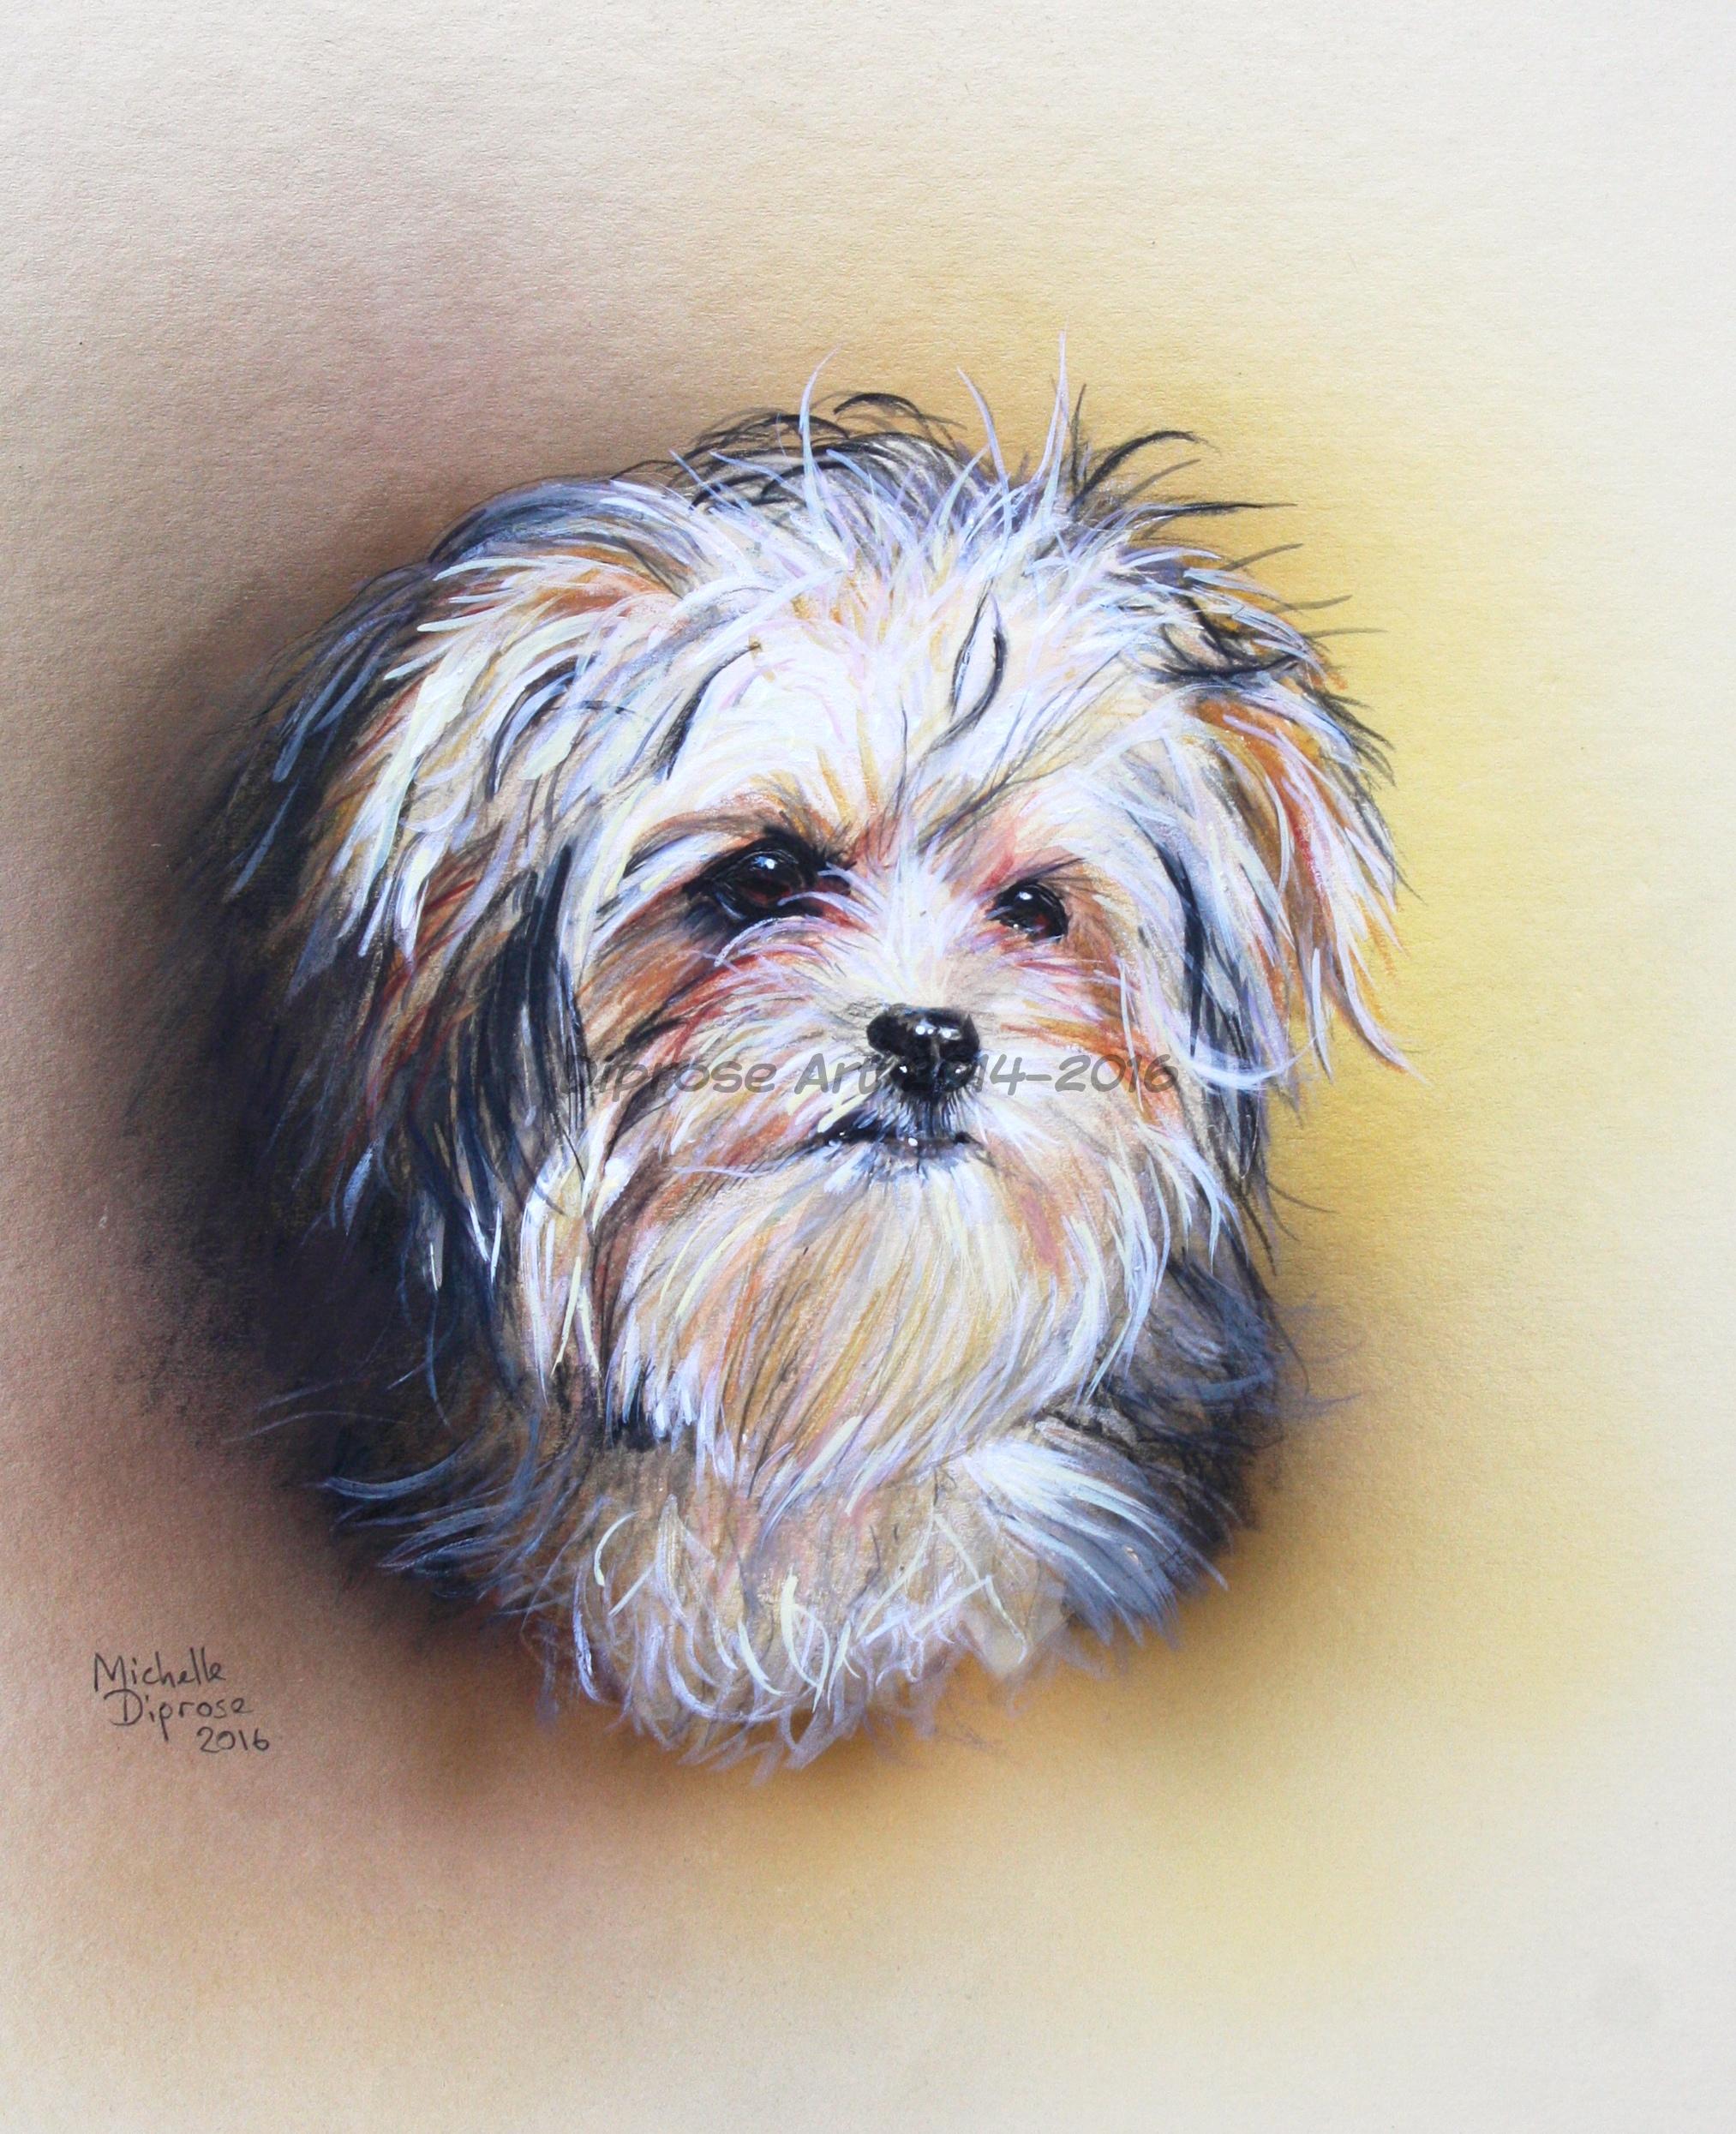 acrylics on board - approx A4 - I was delighted to be asked to paint this little dog&#039;s portrait as Lucy is a favourite of mine and stays with me at my Doggy hotel.  She is just the most amazing character and I love her to bits.